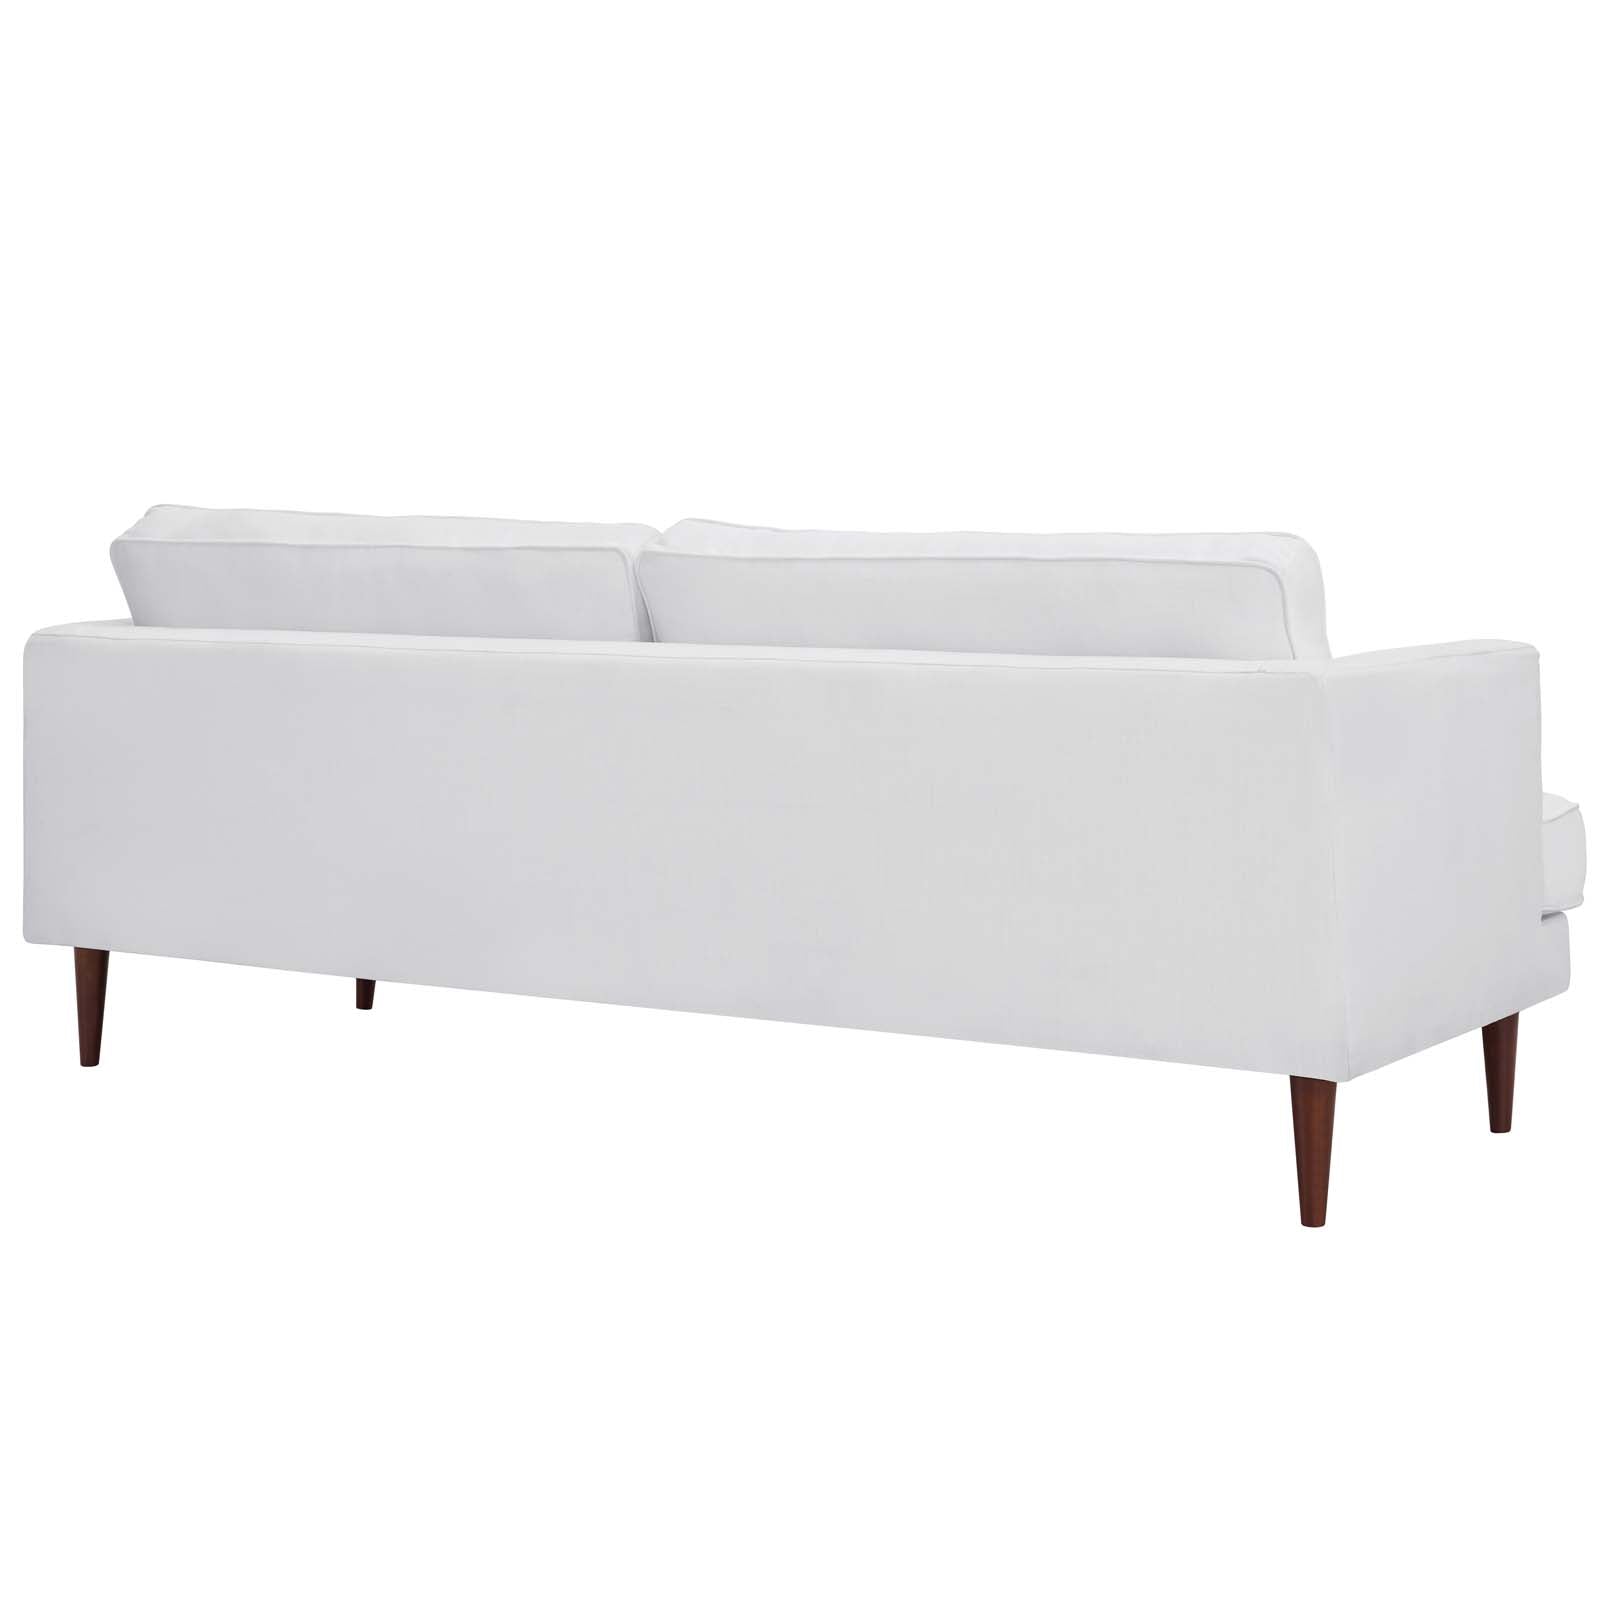 Modway Sofas & Couches - Agile Upholstered Fabric Sofa White